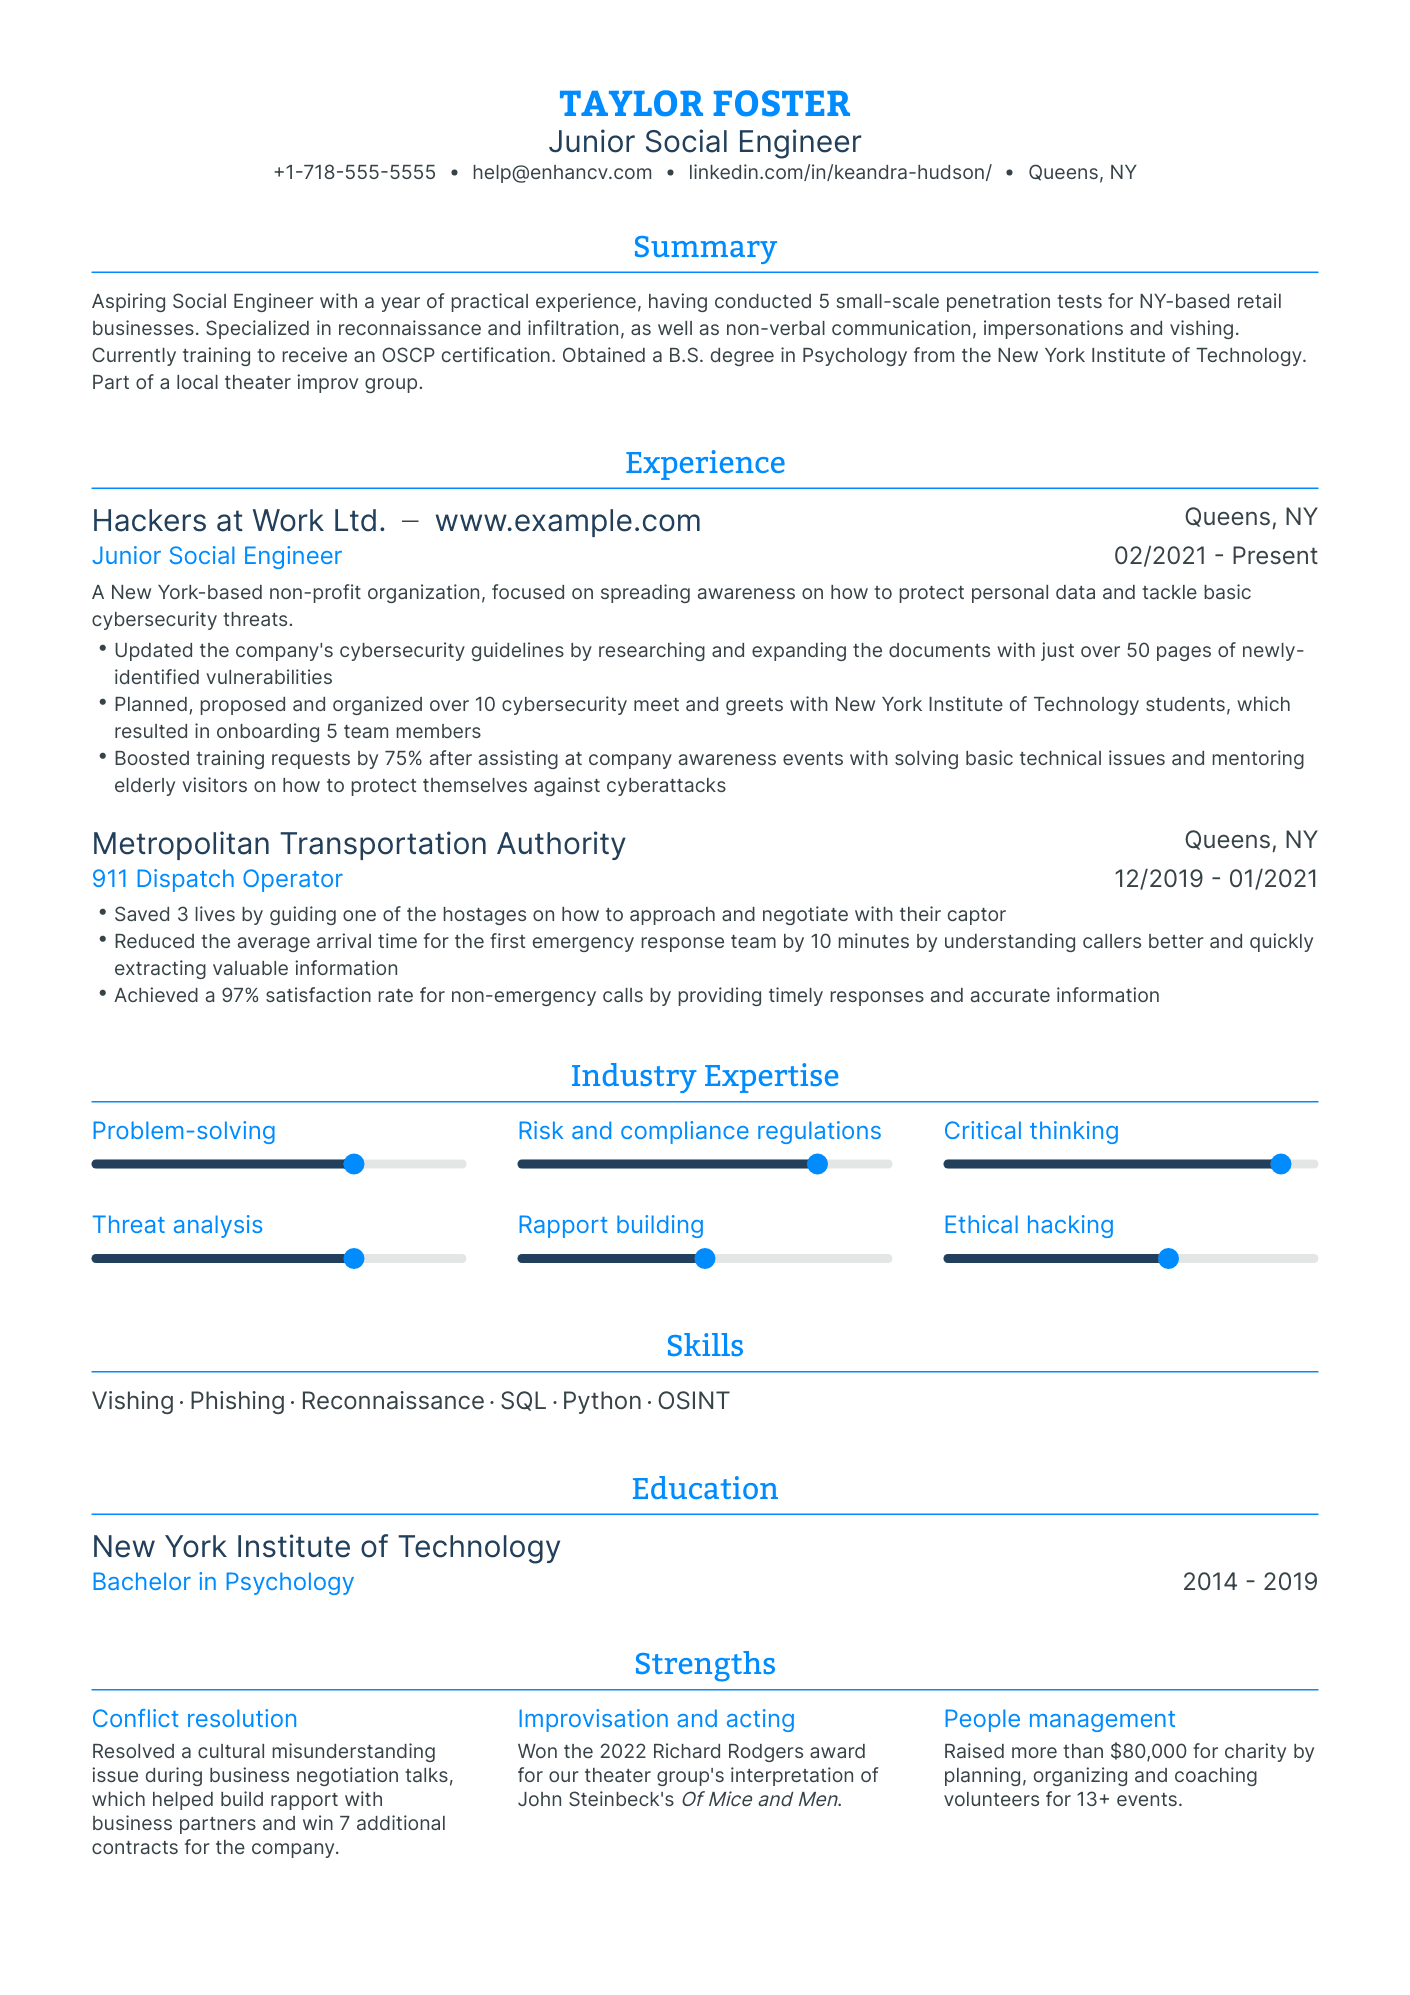 Traditional Social Engineering Resume Template